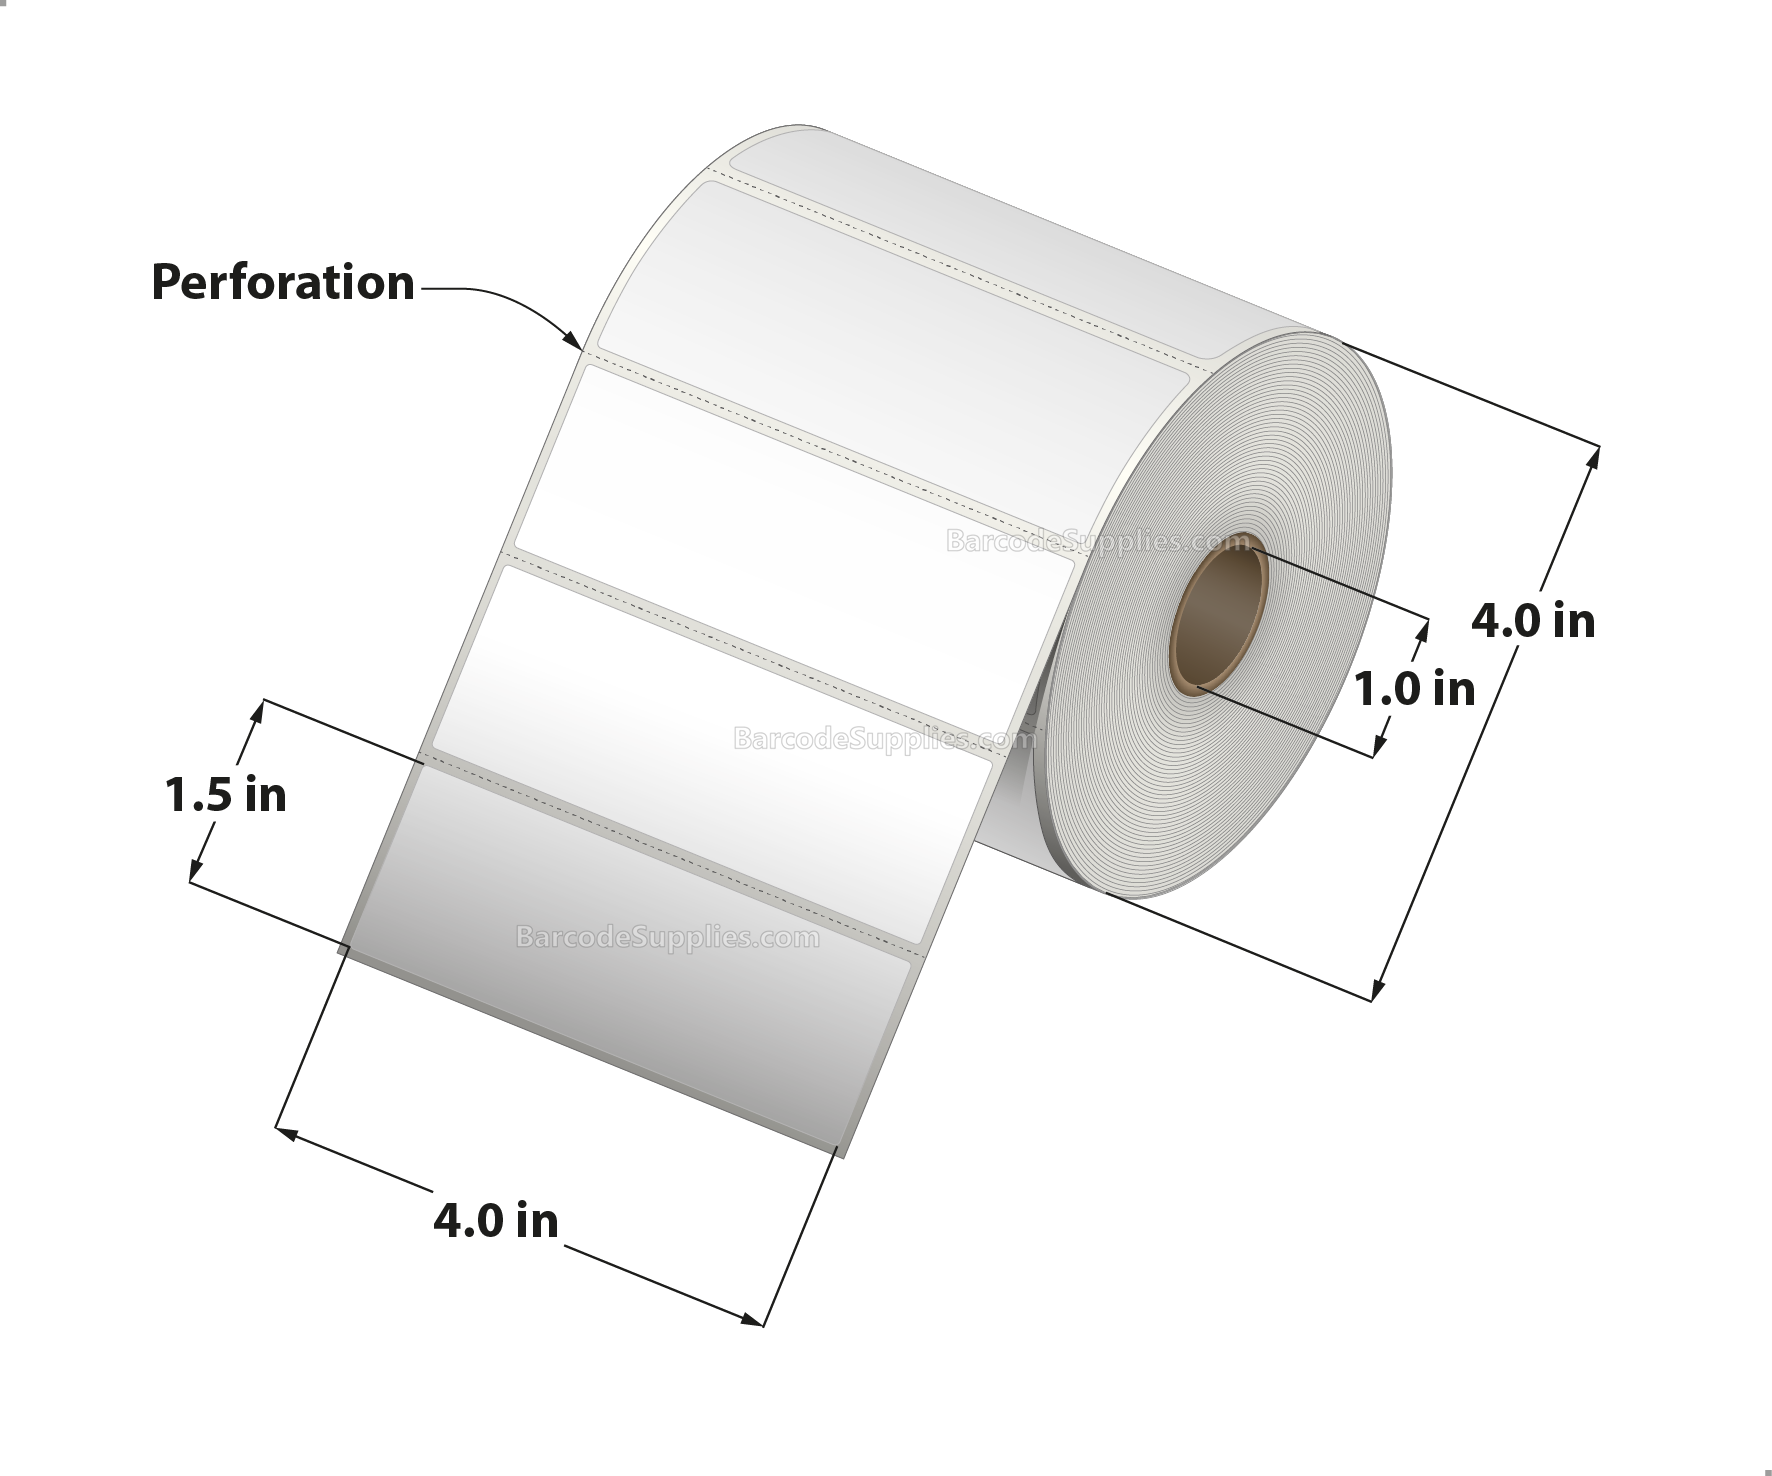 4 x 1.5 Thermal Transfer White Labels With Permanent Acrylic Adhesive - Perforated - 960 Labels Per Roll - Carton Of 4 Rolls - 3840 Labels Total - MPN: TH415-14PTT